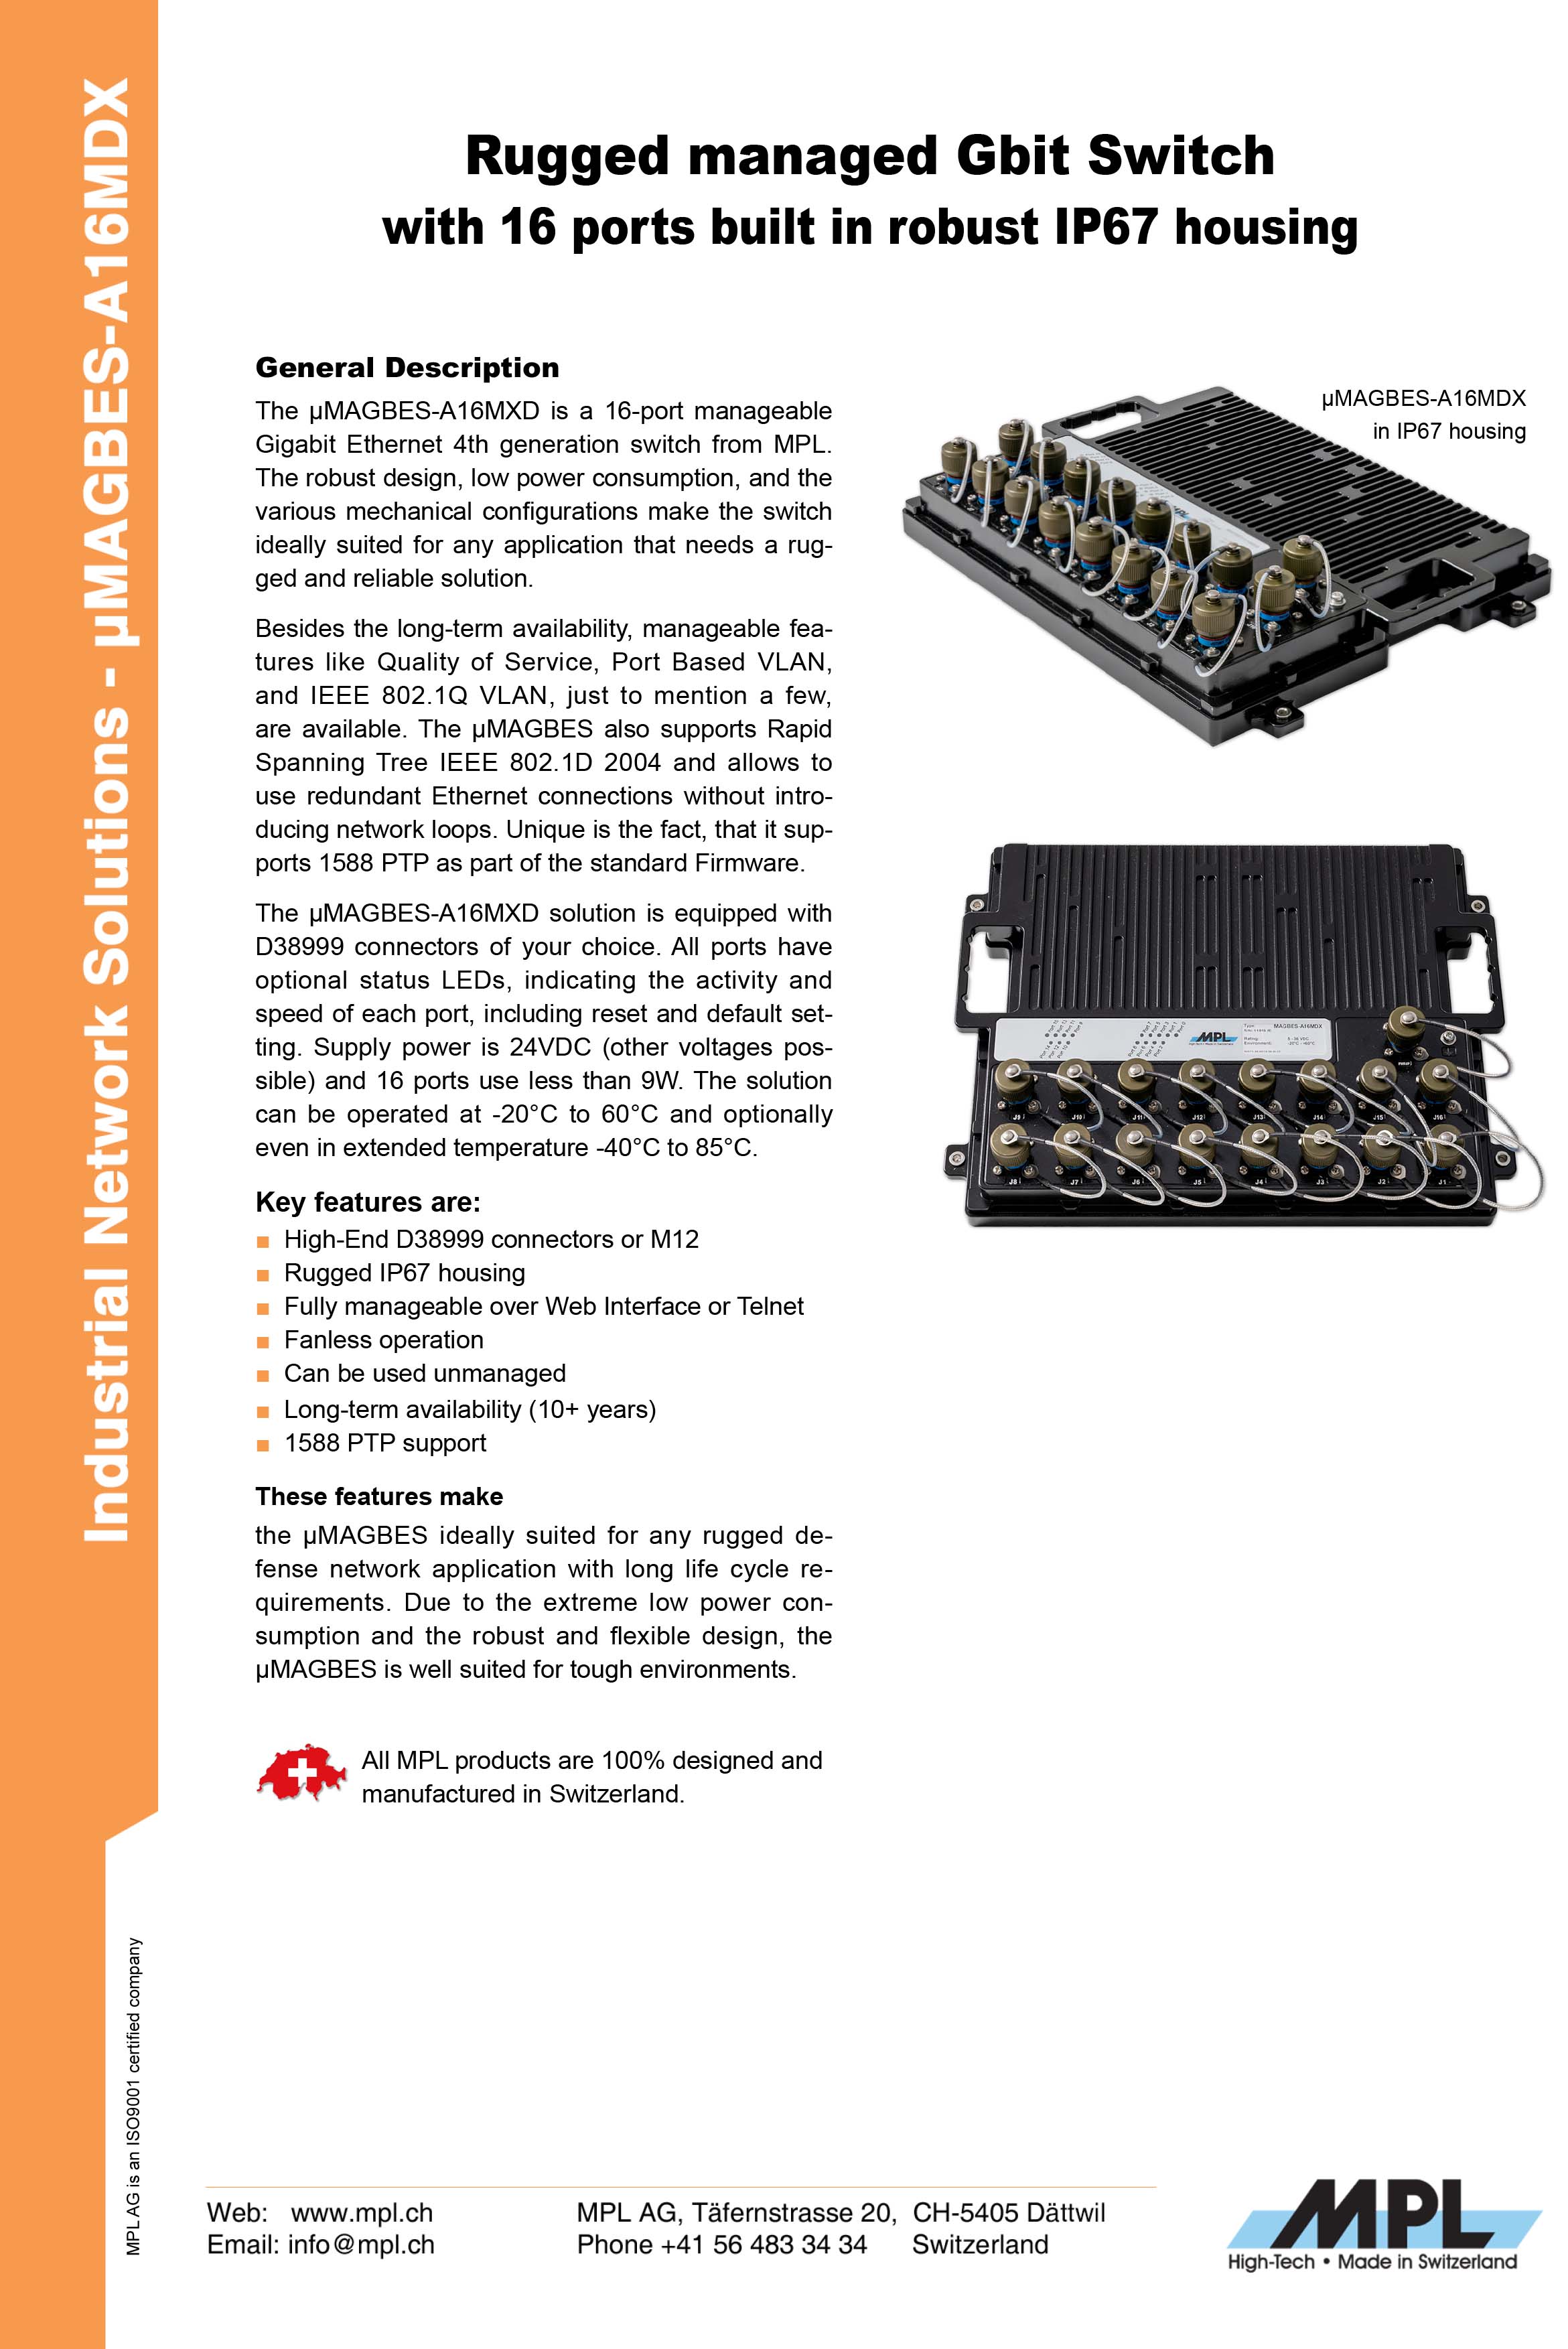 UMAGBES-A16MDX Rugged managed Gbit Switch with 16 ports built in robust IP67 housing